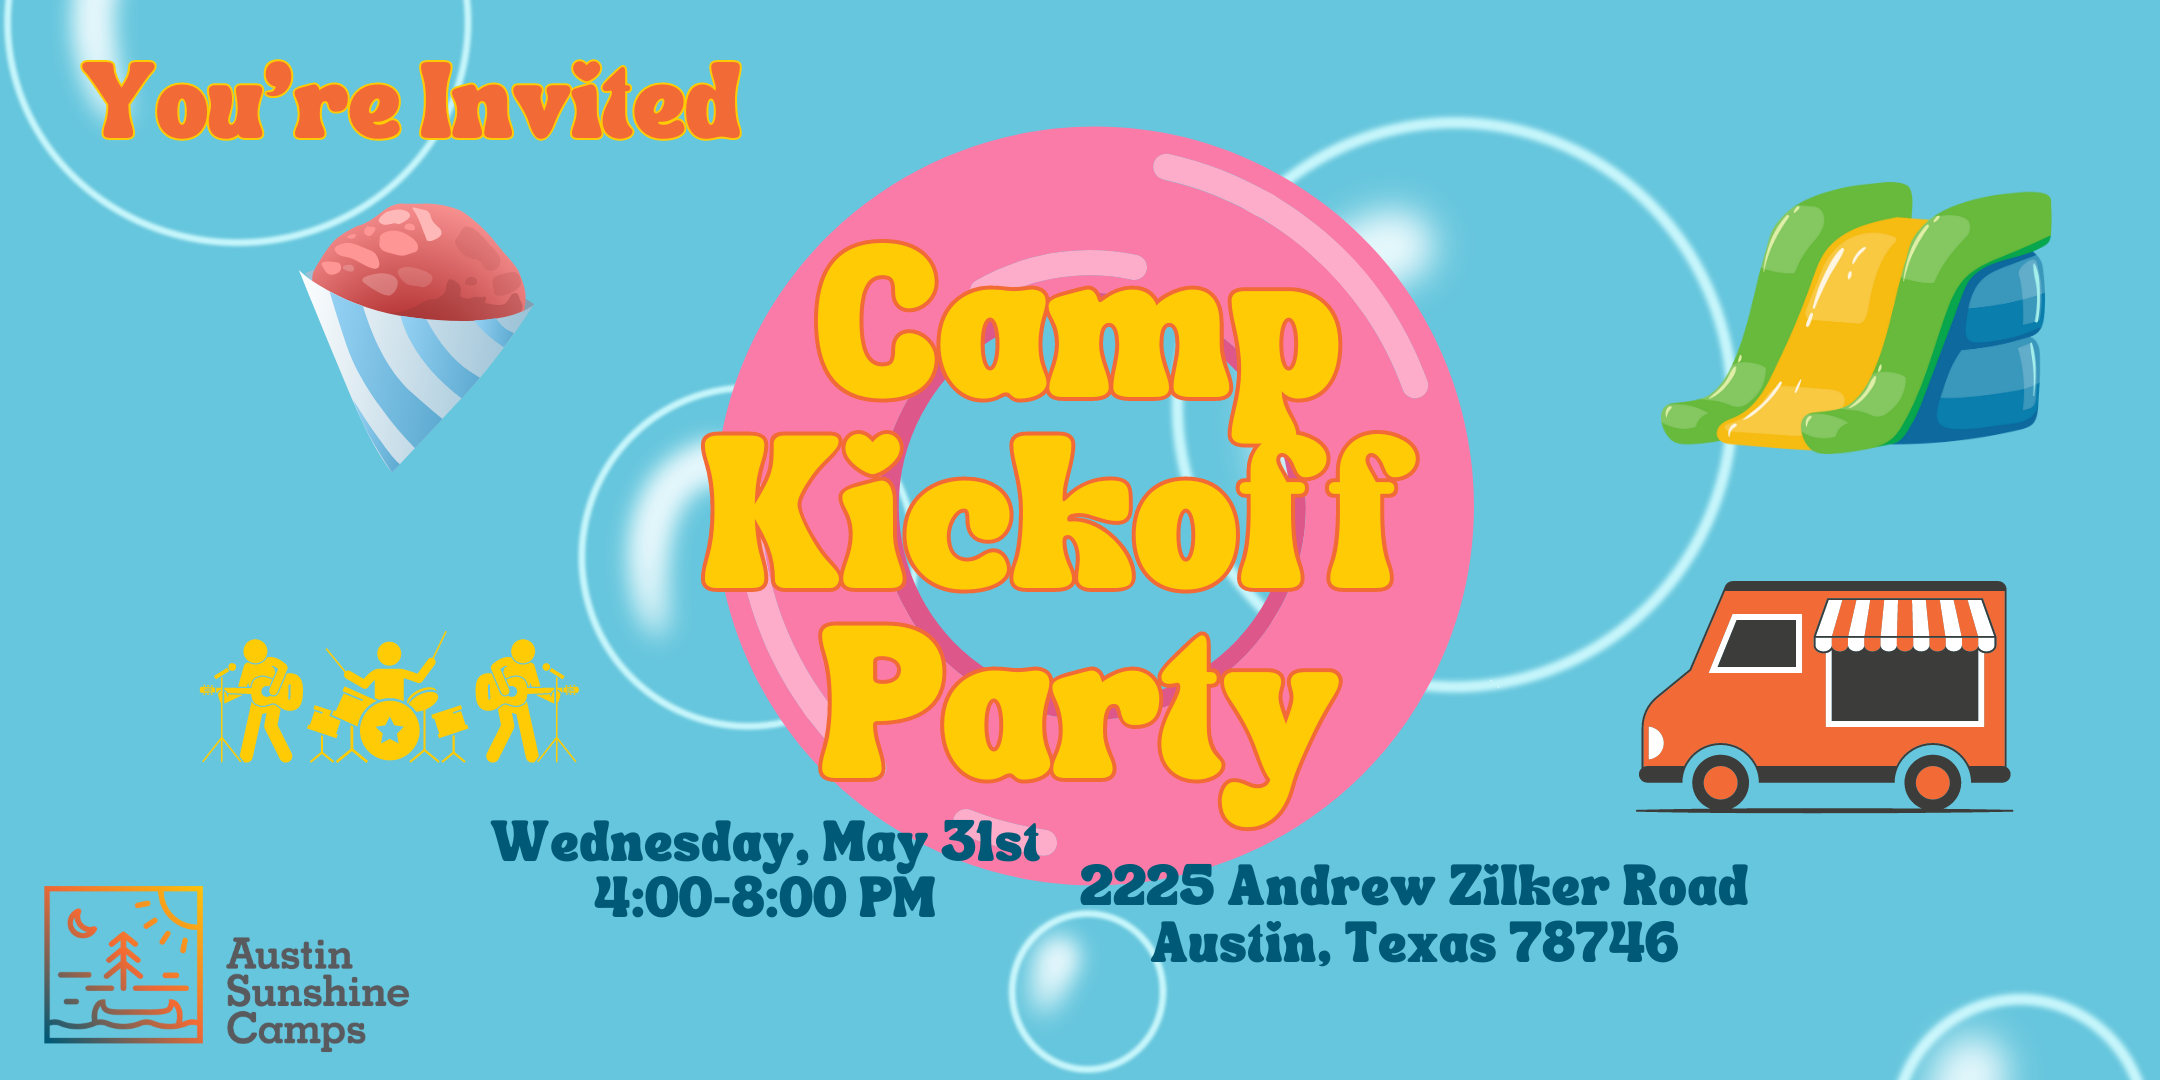 Camp Kickoff Party Promotional Graphic